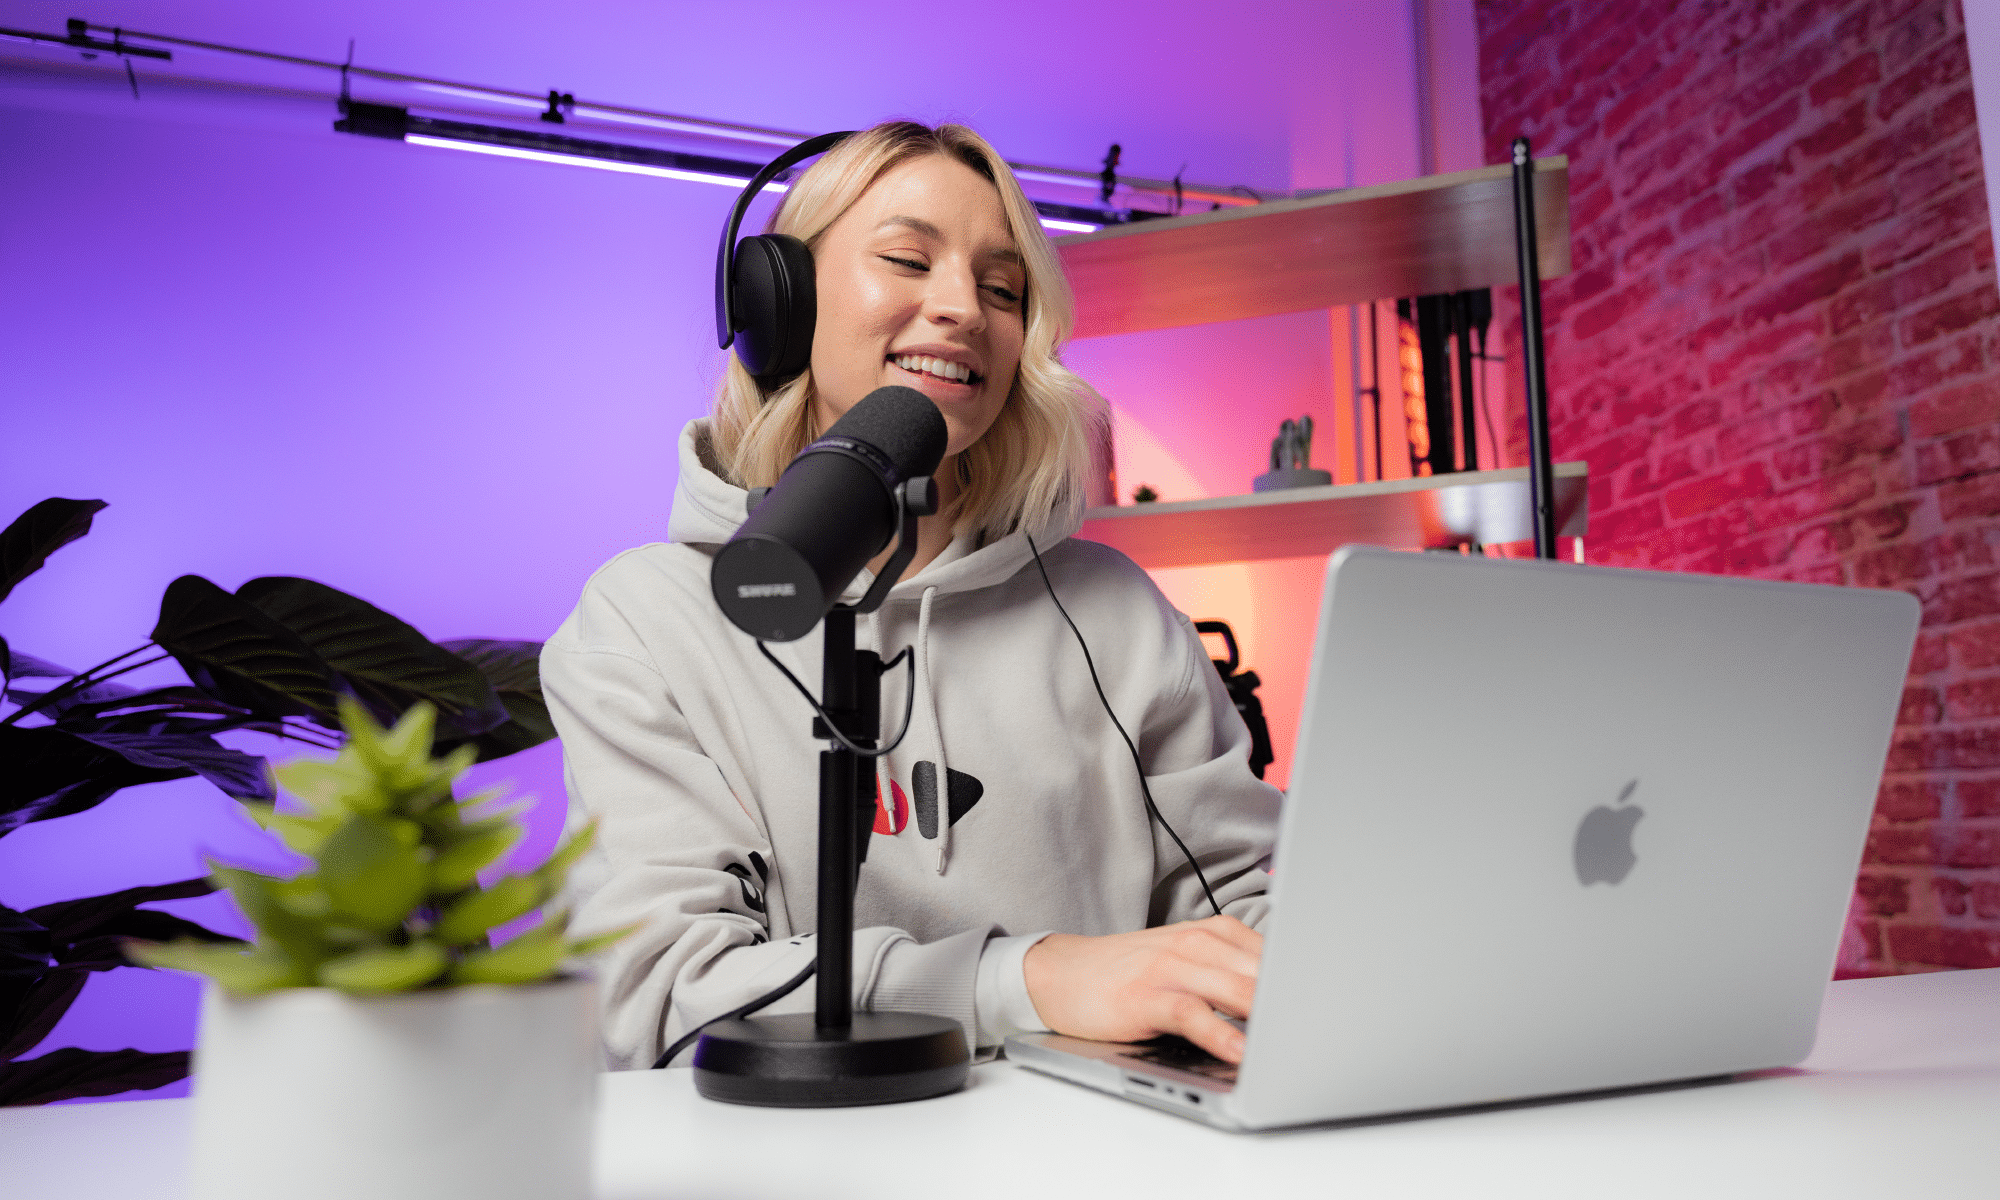 A woman smiles as she speaks into a microphone and records content into her Mac laptop.